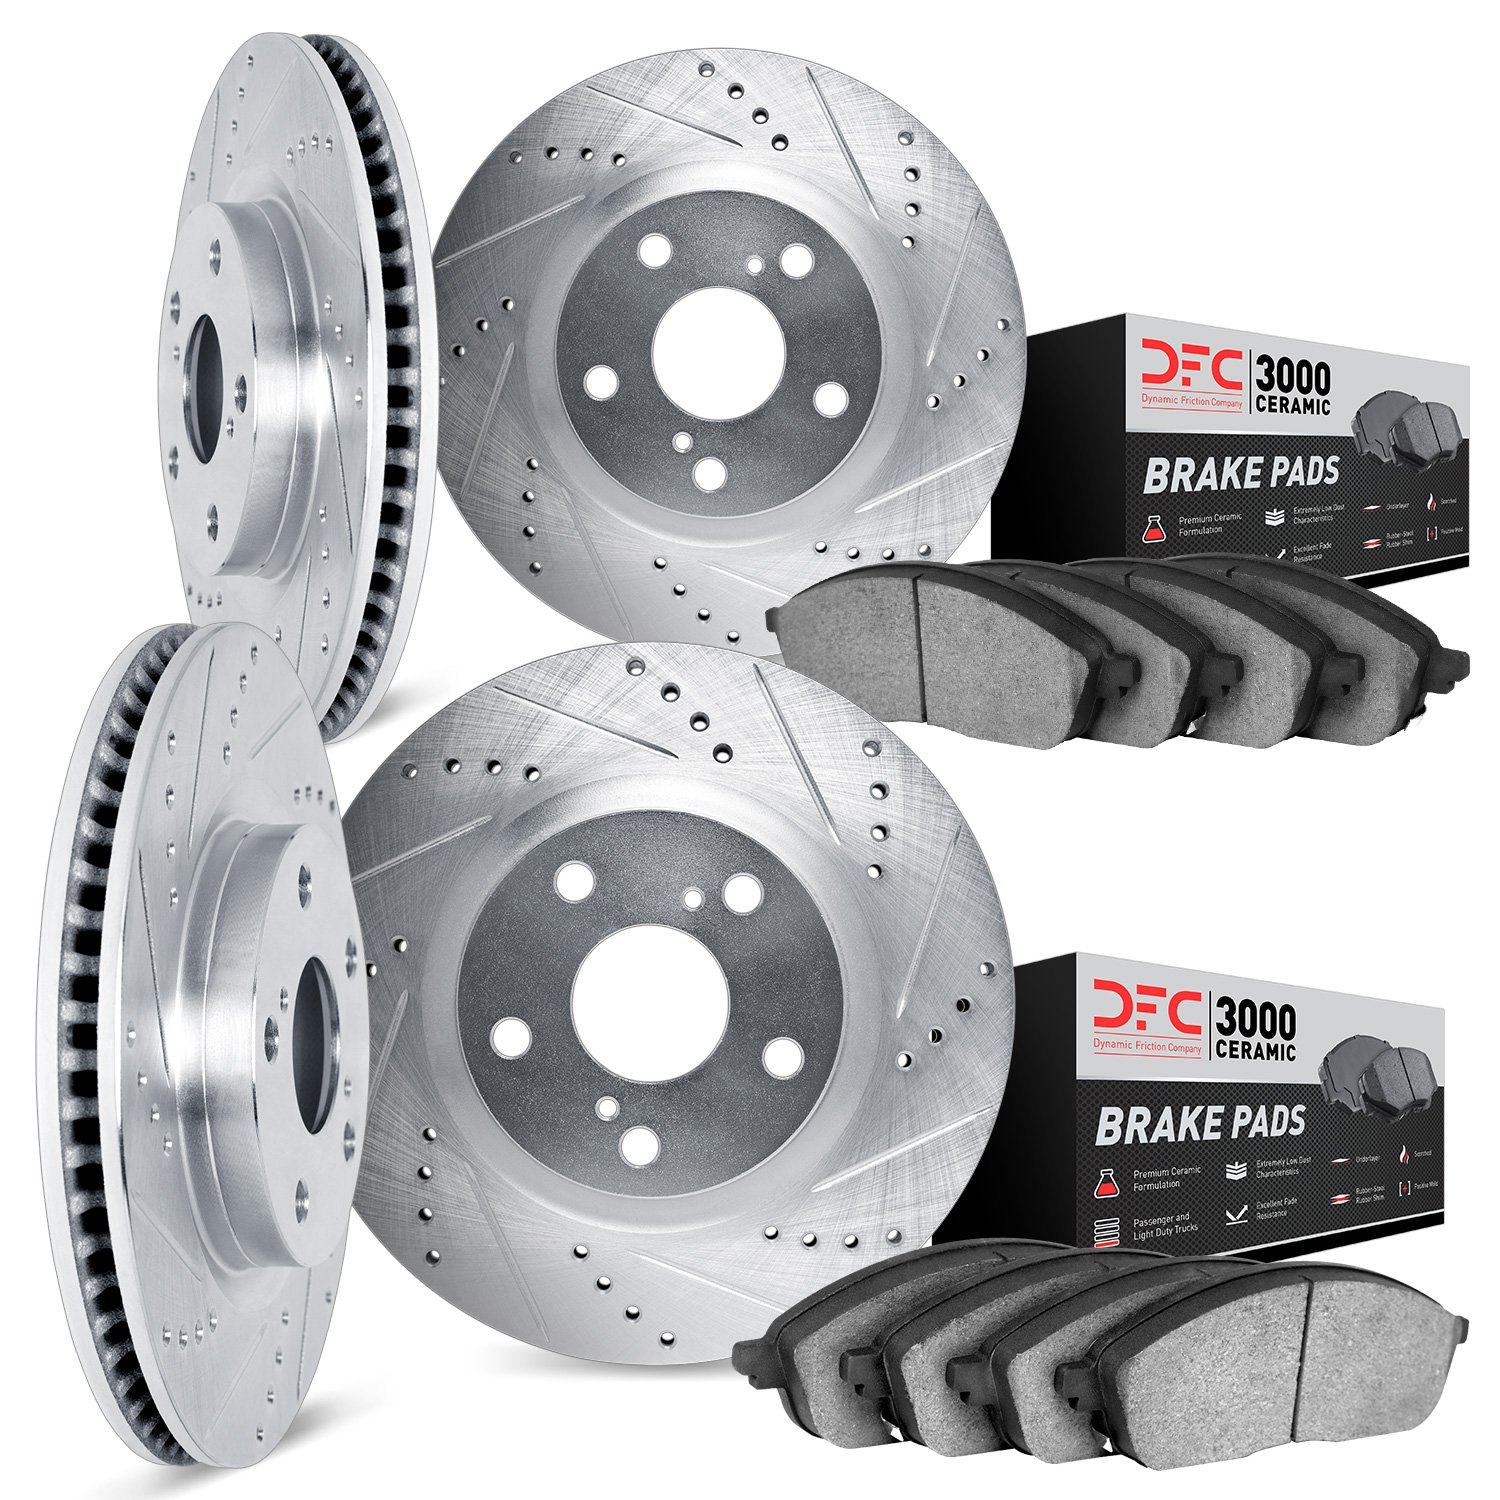 7304-01007 Drilled/Slotted Brake Rotor with 3000-Series Ceramic Brake Pads Kit [Silver], 2009-2017 Suzuki, Position: Front and R